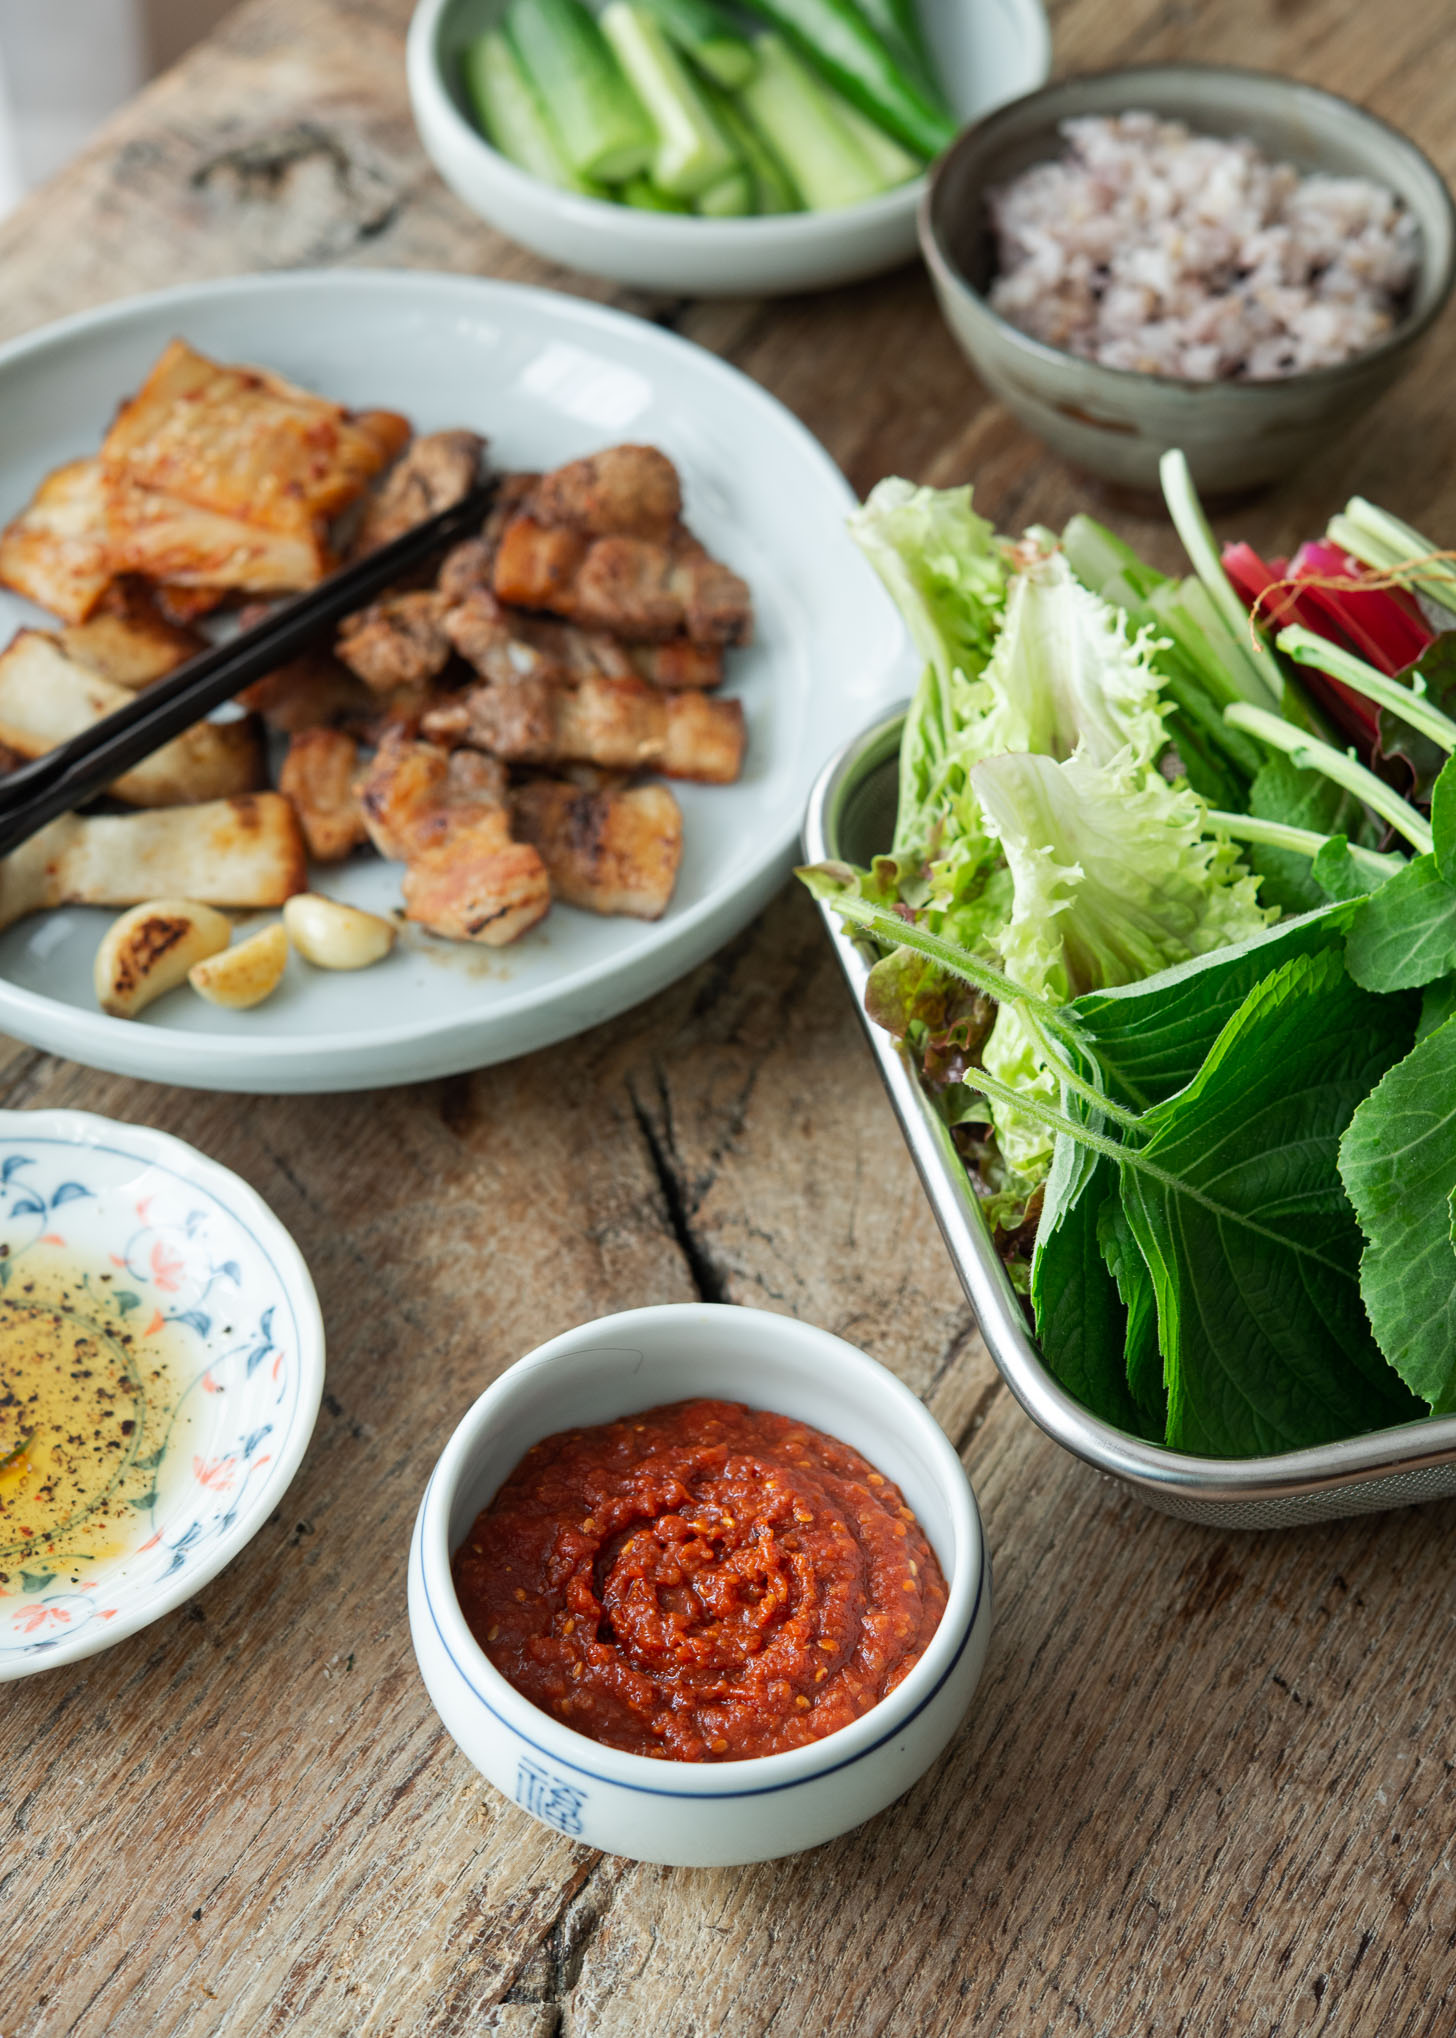 Ssamjang is served with Korean bbq pork belly and various lettuce.